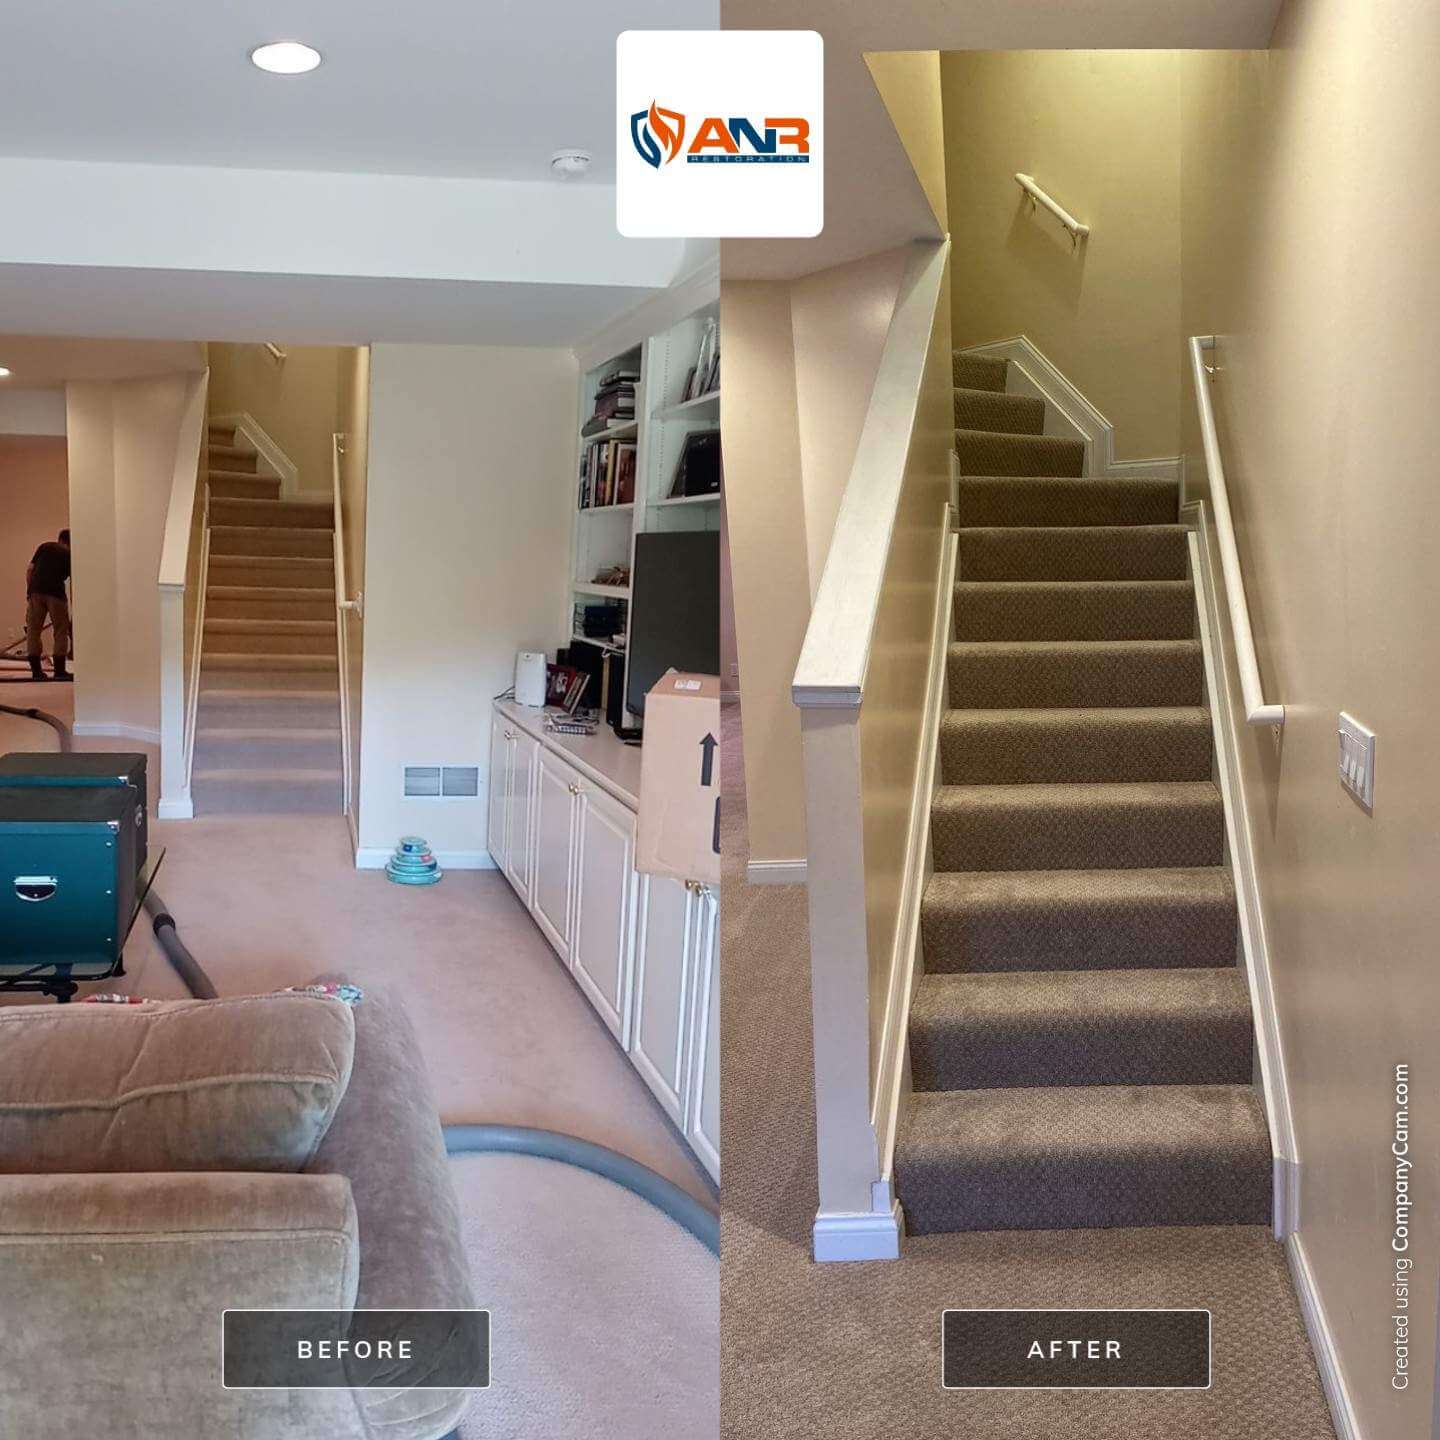 Before/After Basement Water Removal Services by ANR Restoration